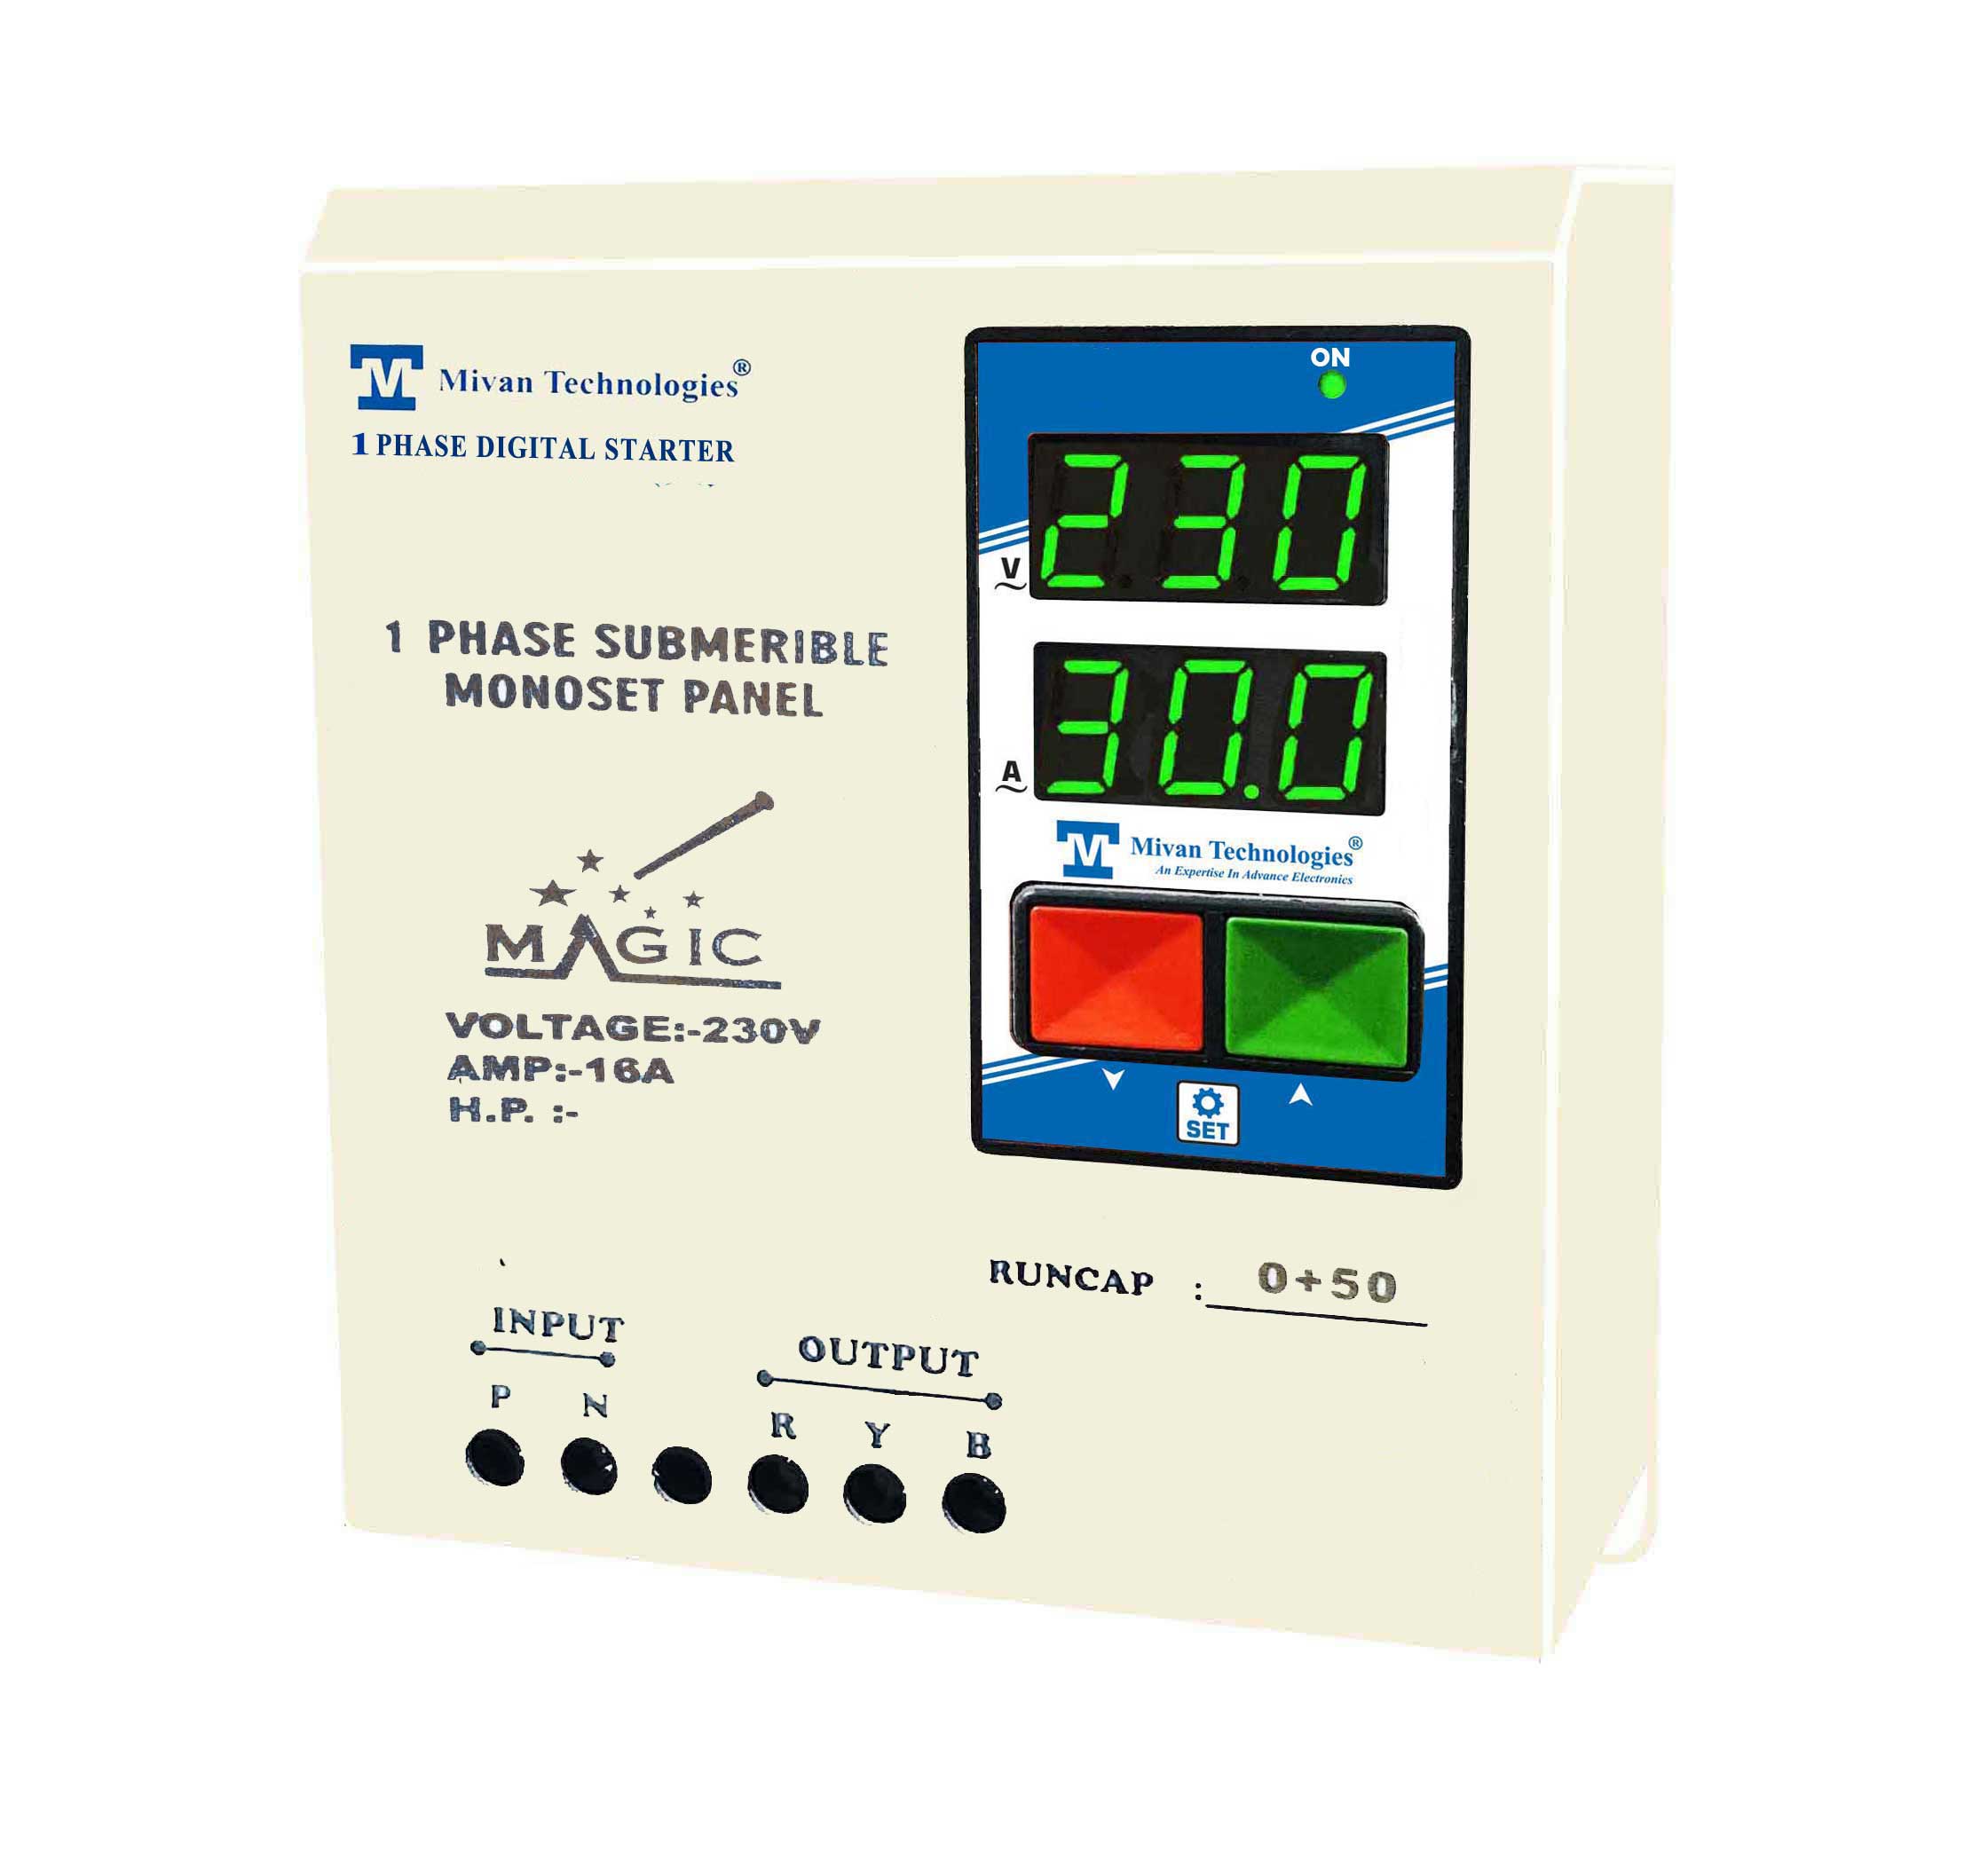 DS R Single phase Digital motor starter panel with volt and amp meter with HV LV OL DRY protection cyc timer on and off delay timer